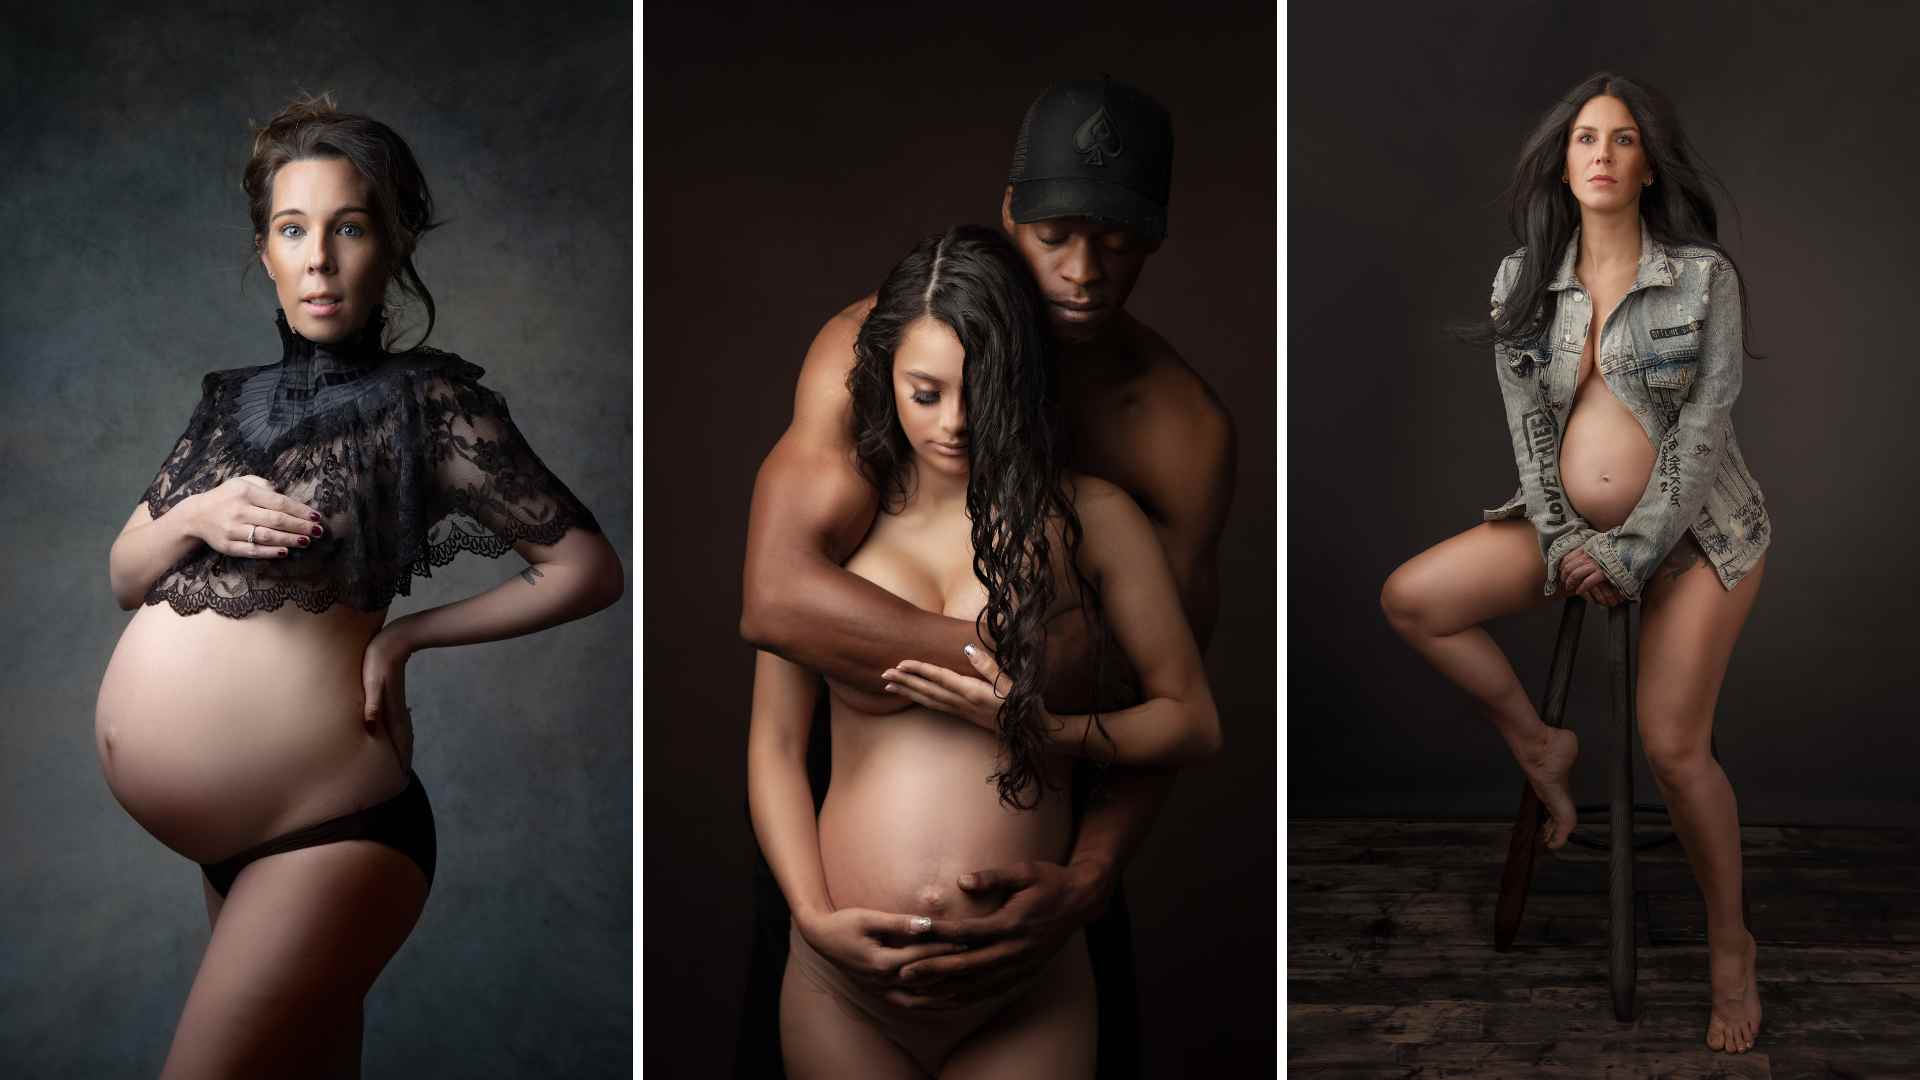 3 fine art images of maternity photography. shot against a dark backdrop with dramatic lighting